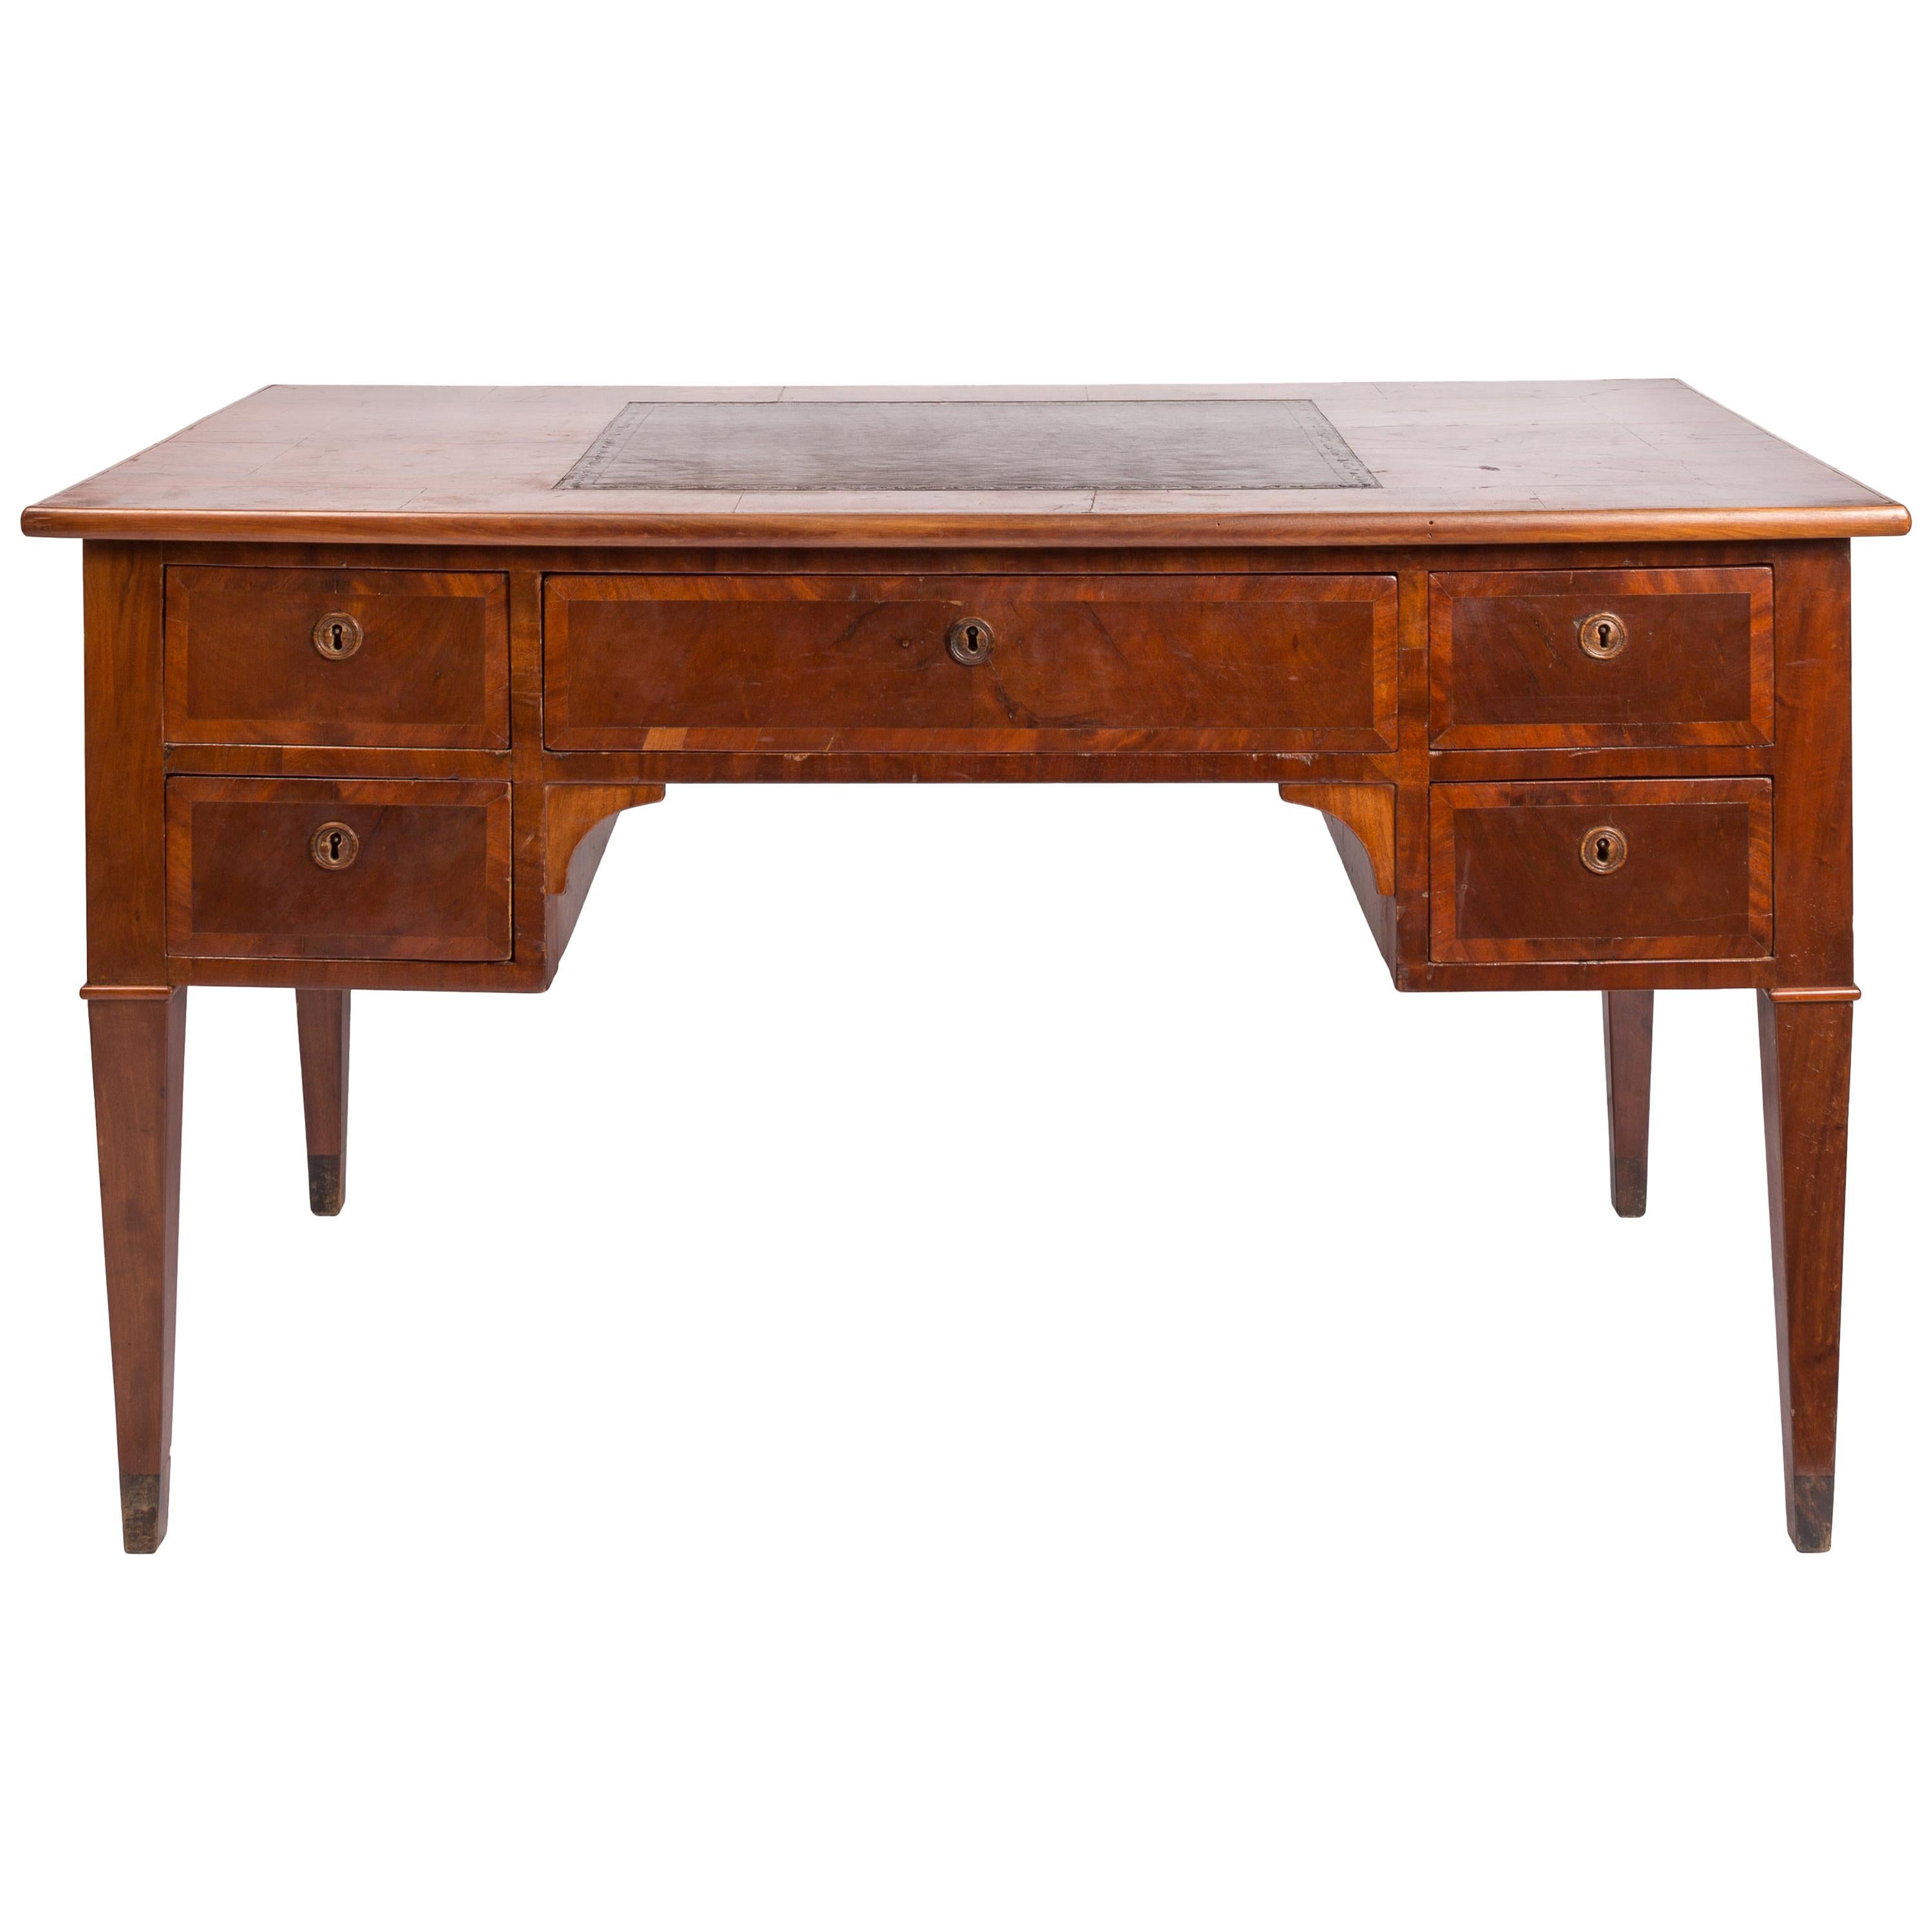 19th Century English Writing Desk, Partner Style, Leather Top, Wood Grain Veneer For Sale